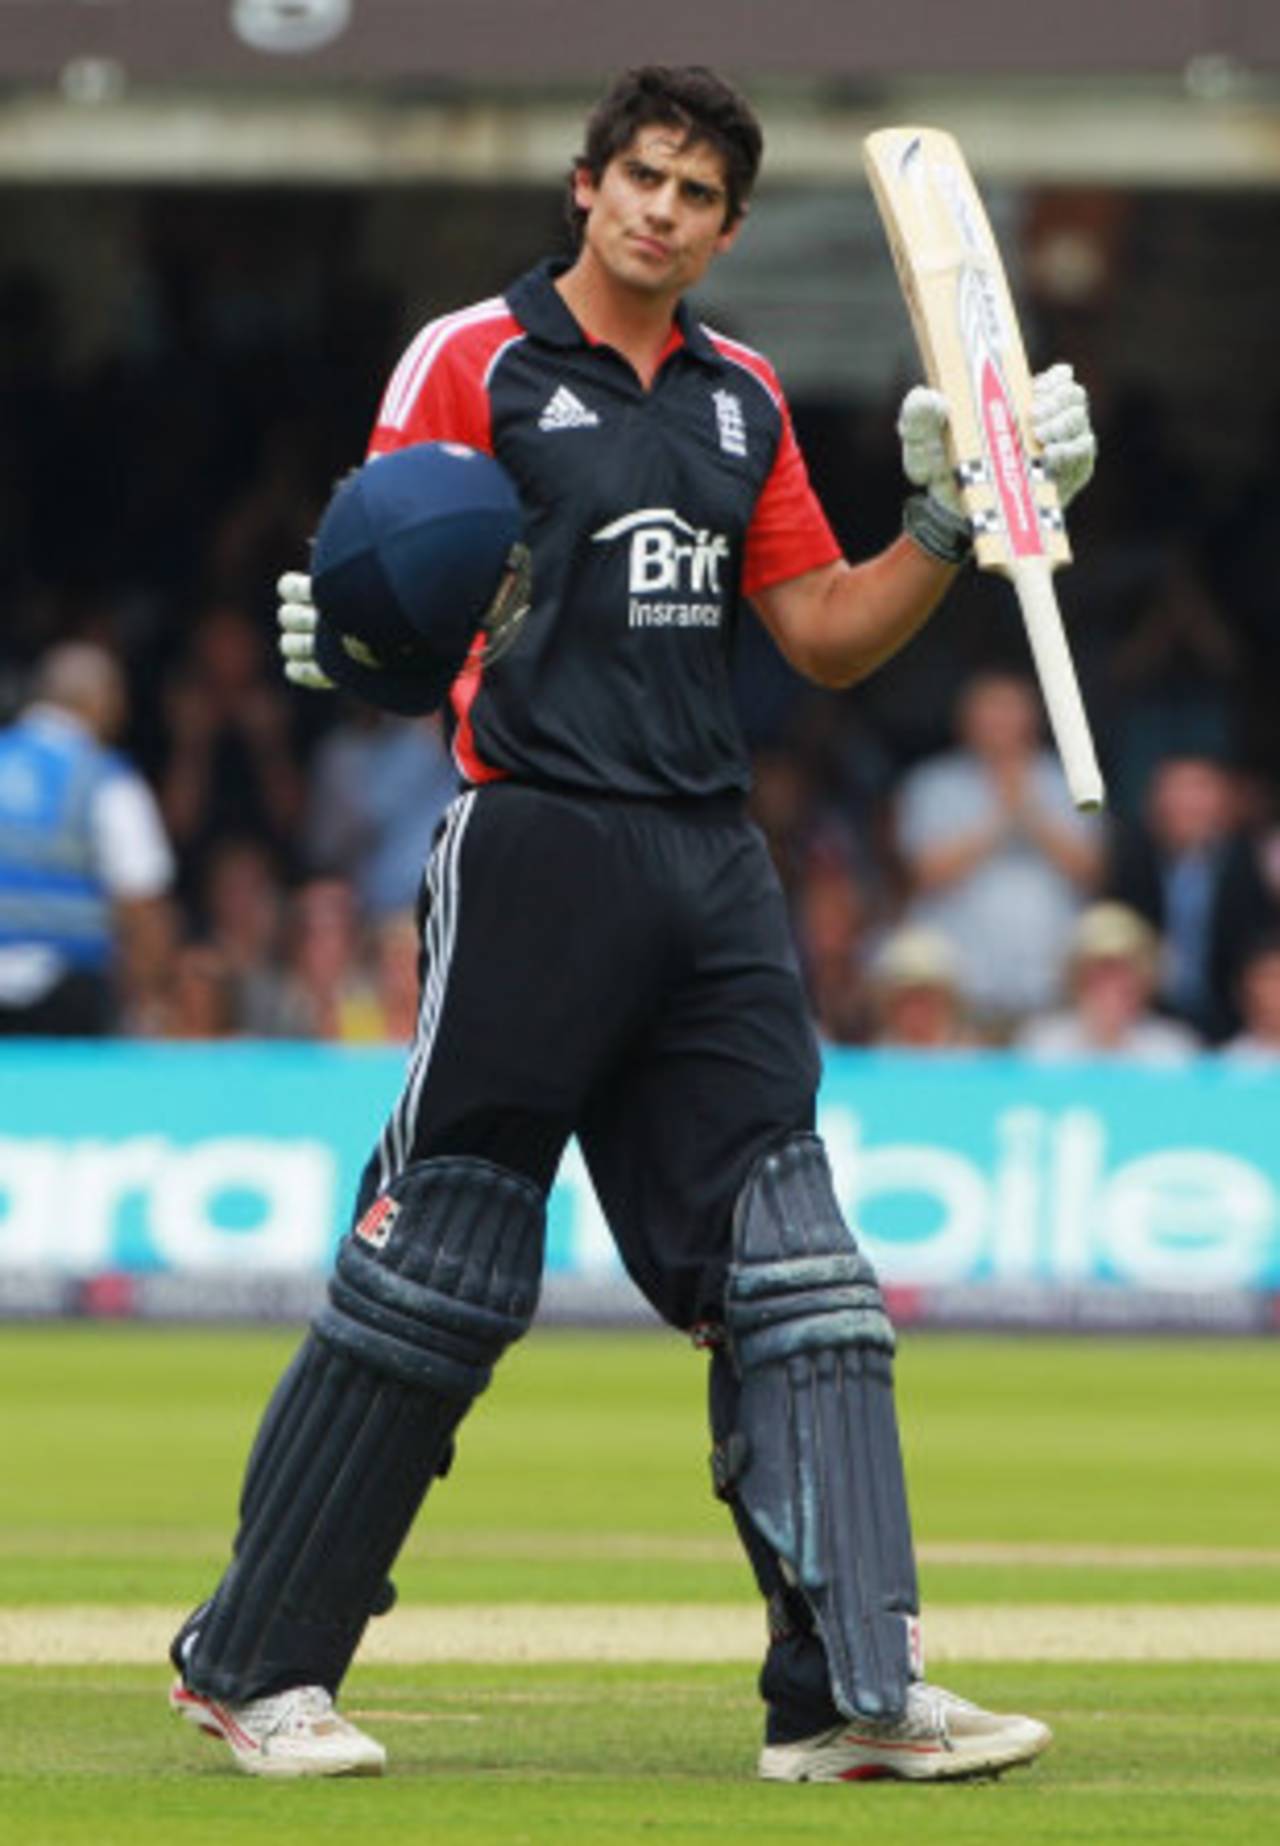 Alastair Cook brings up his second ODI century, and his first as captain, England v Sri Lanka, 3rd ODI, Lord's July 3 2011